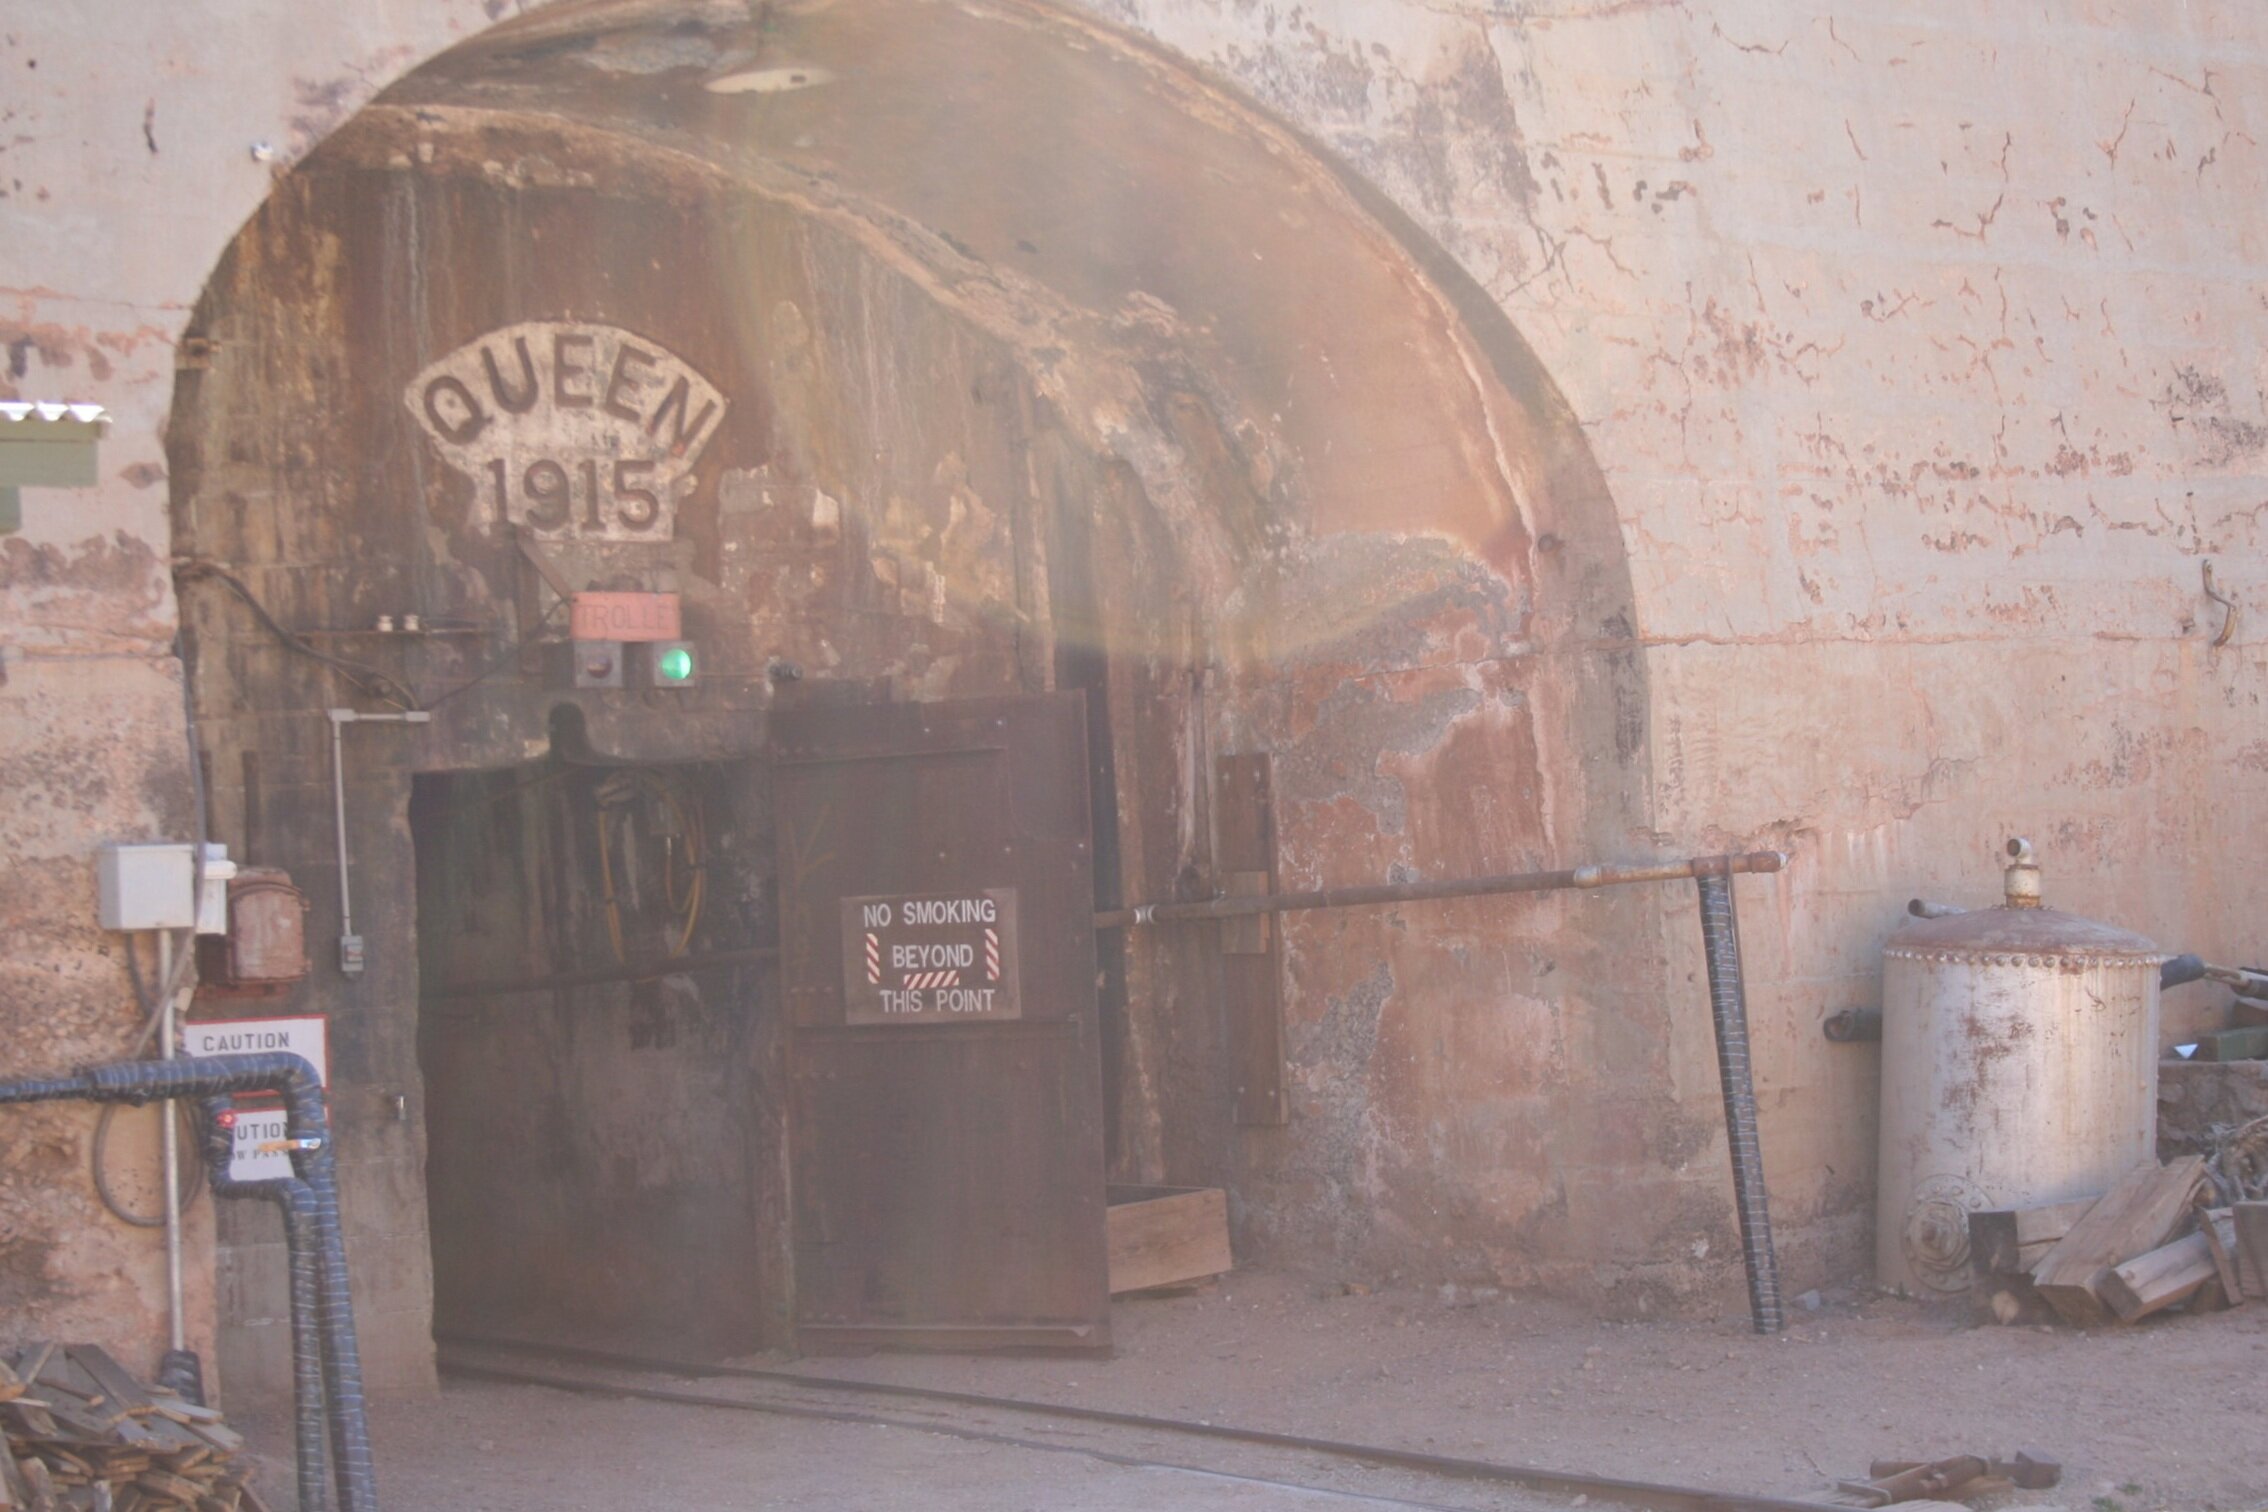   The entrance to the iconic Copper Queen Mine.  